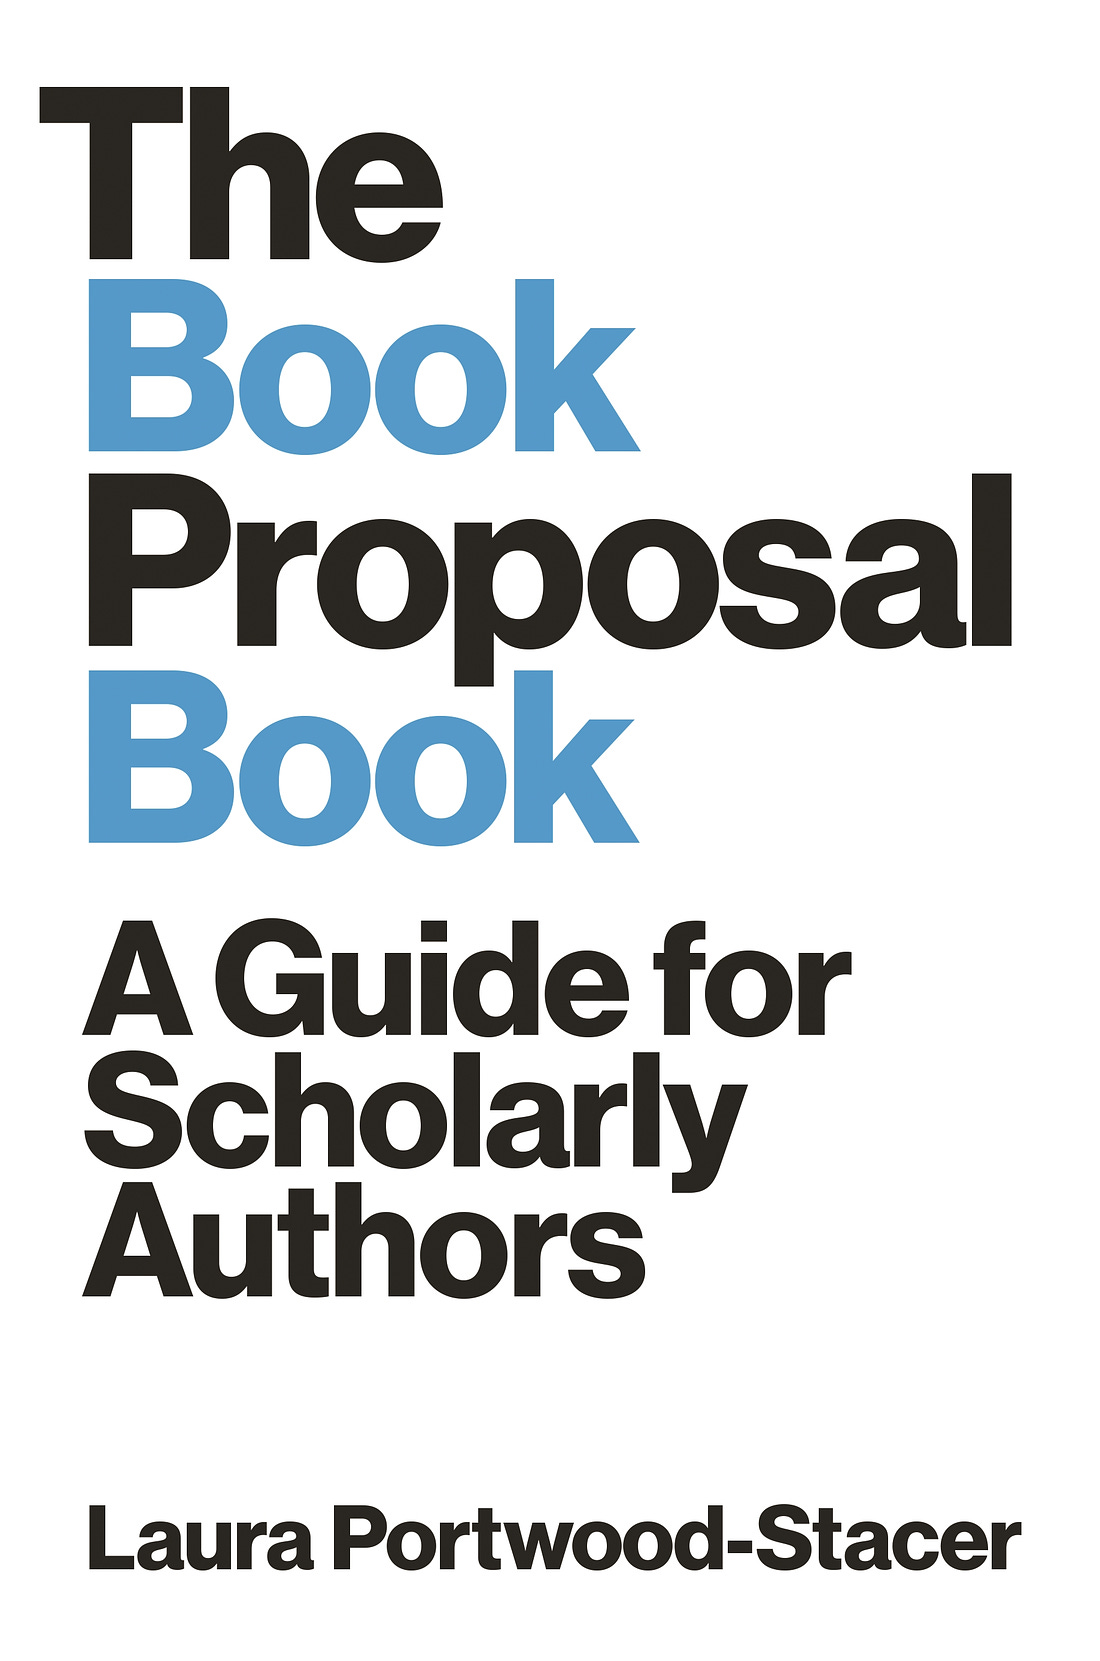 The Book Proposal Book: A Guide for Scholarly Authors, by Laura Portwood-Stacer